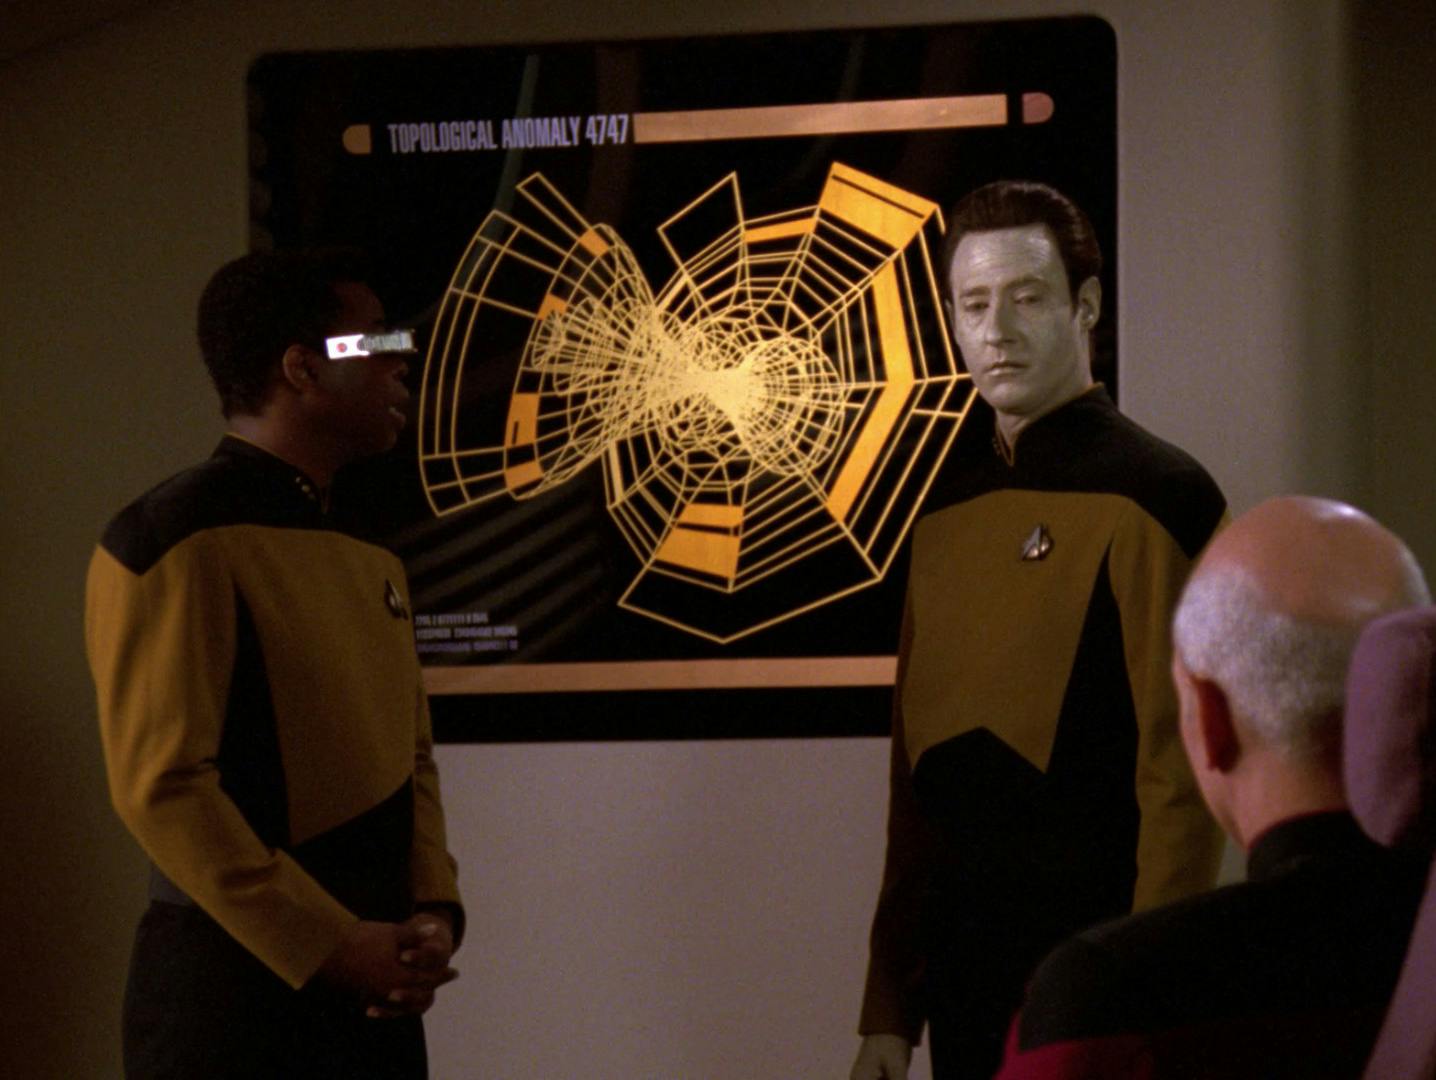 Geordi La Forge and Data stand and present the topological anomaly 4747 to Picard and senior crew members in 'I, Borg'